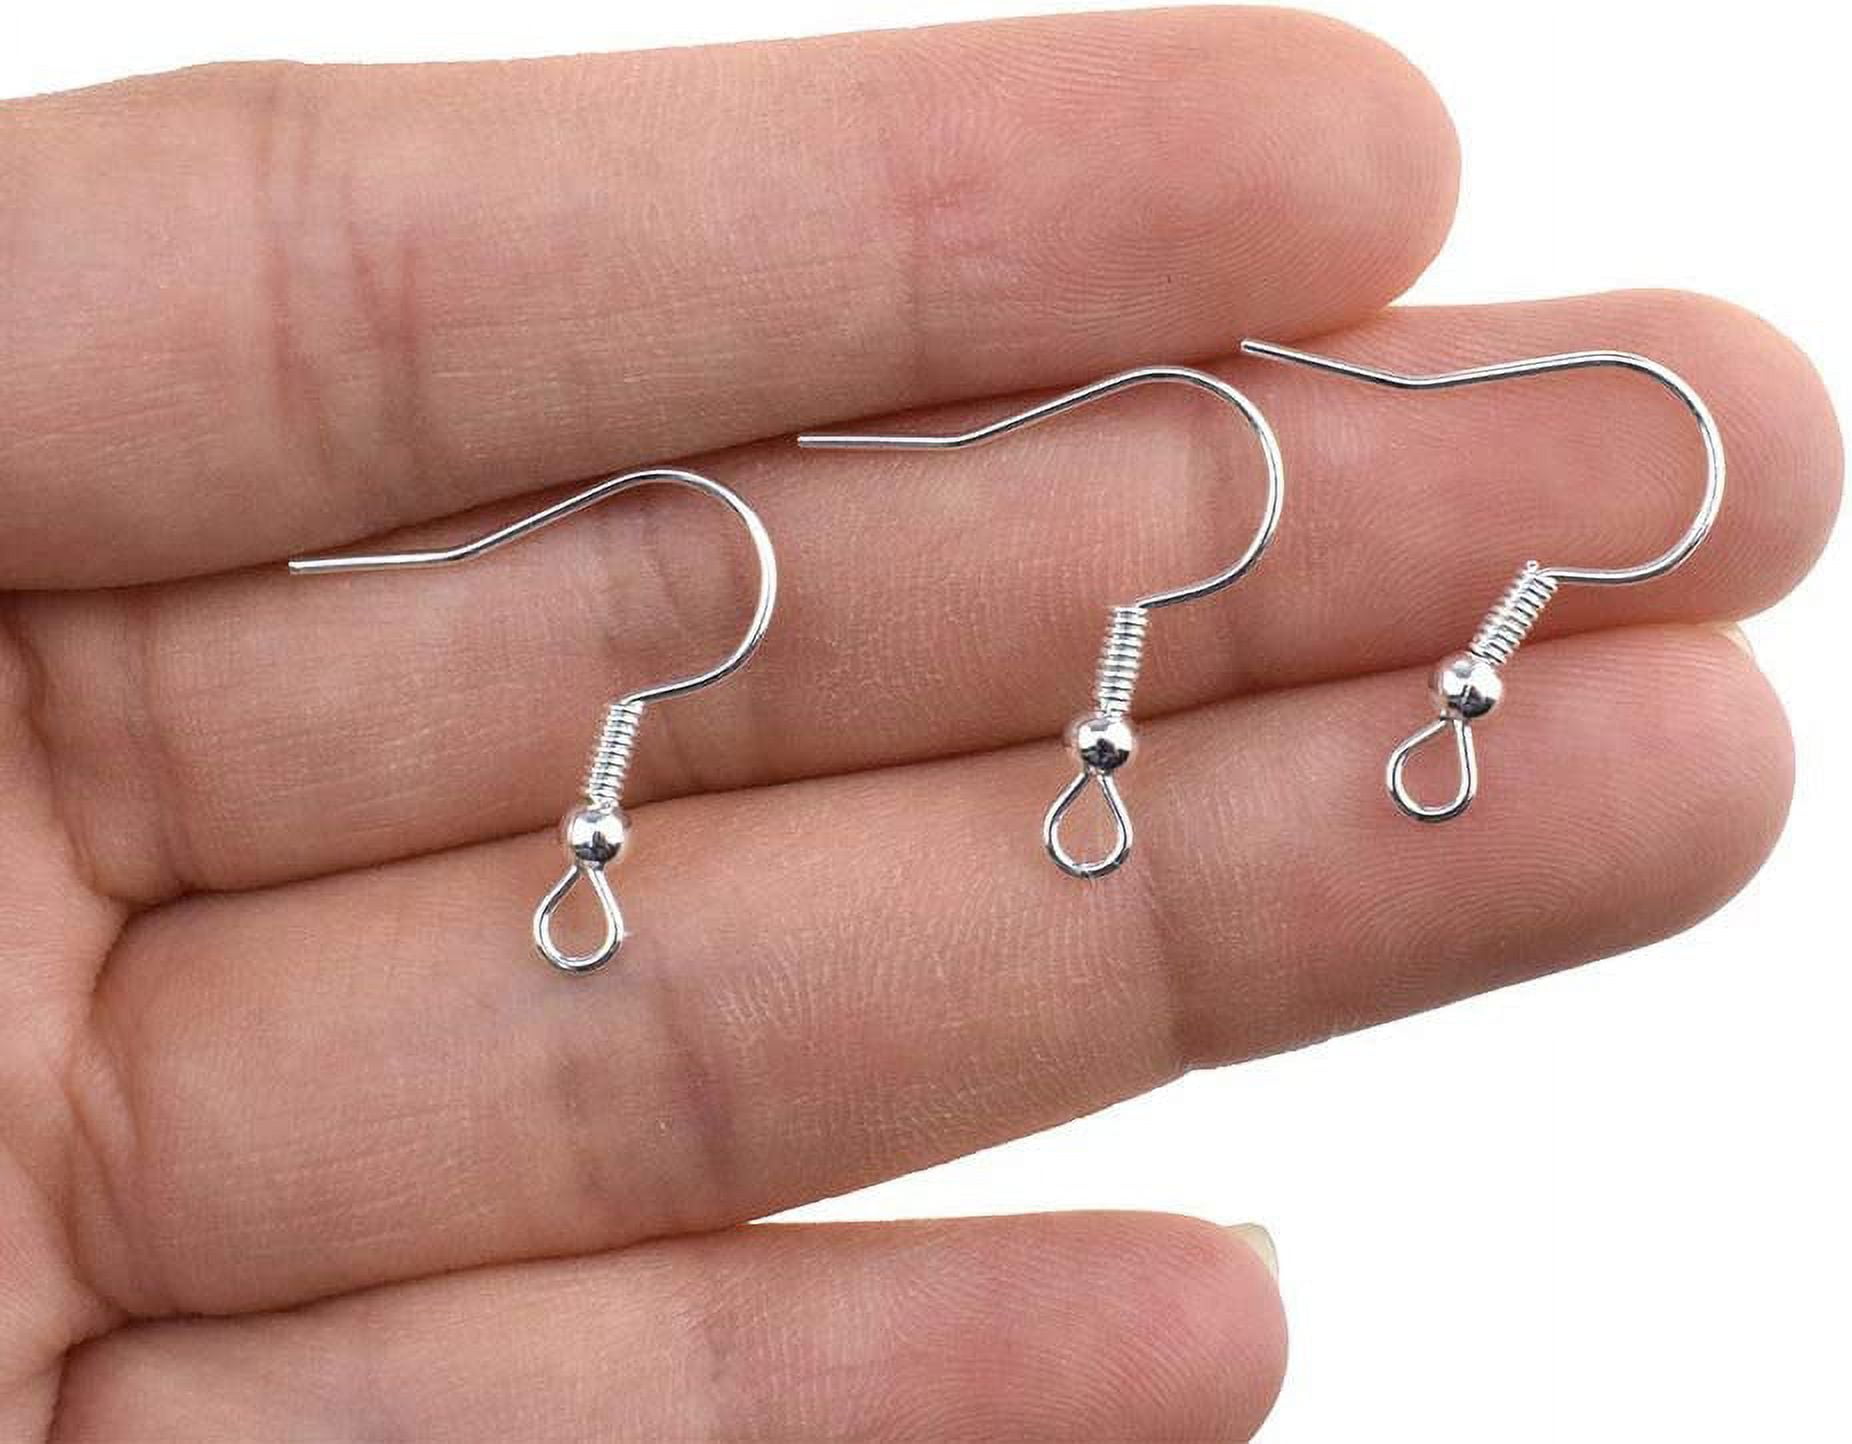 Earring Fish Hooks Hypoallergenic 20x20mm Wire with Ball and Coil No Irritate Itchy Tarnish for DIY Craft Jewelry Making Surgical Steel Silver